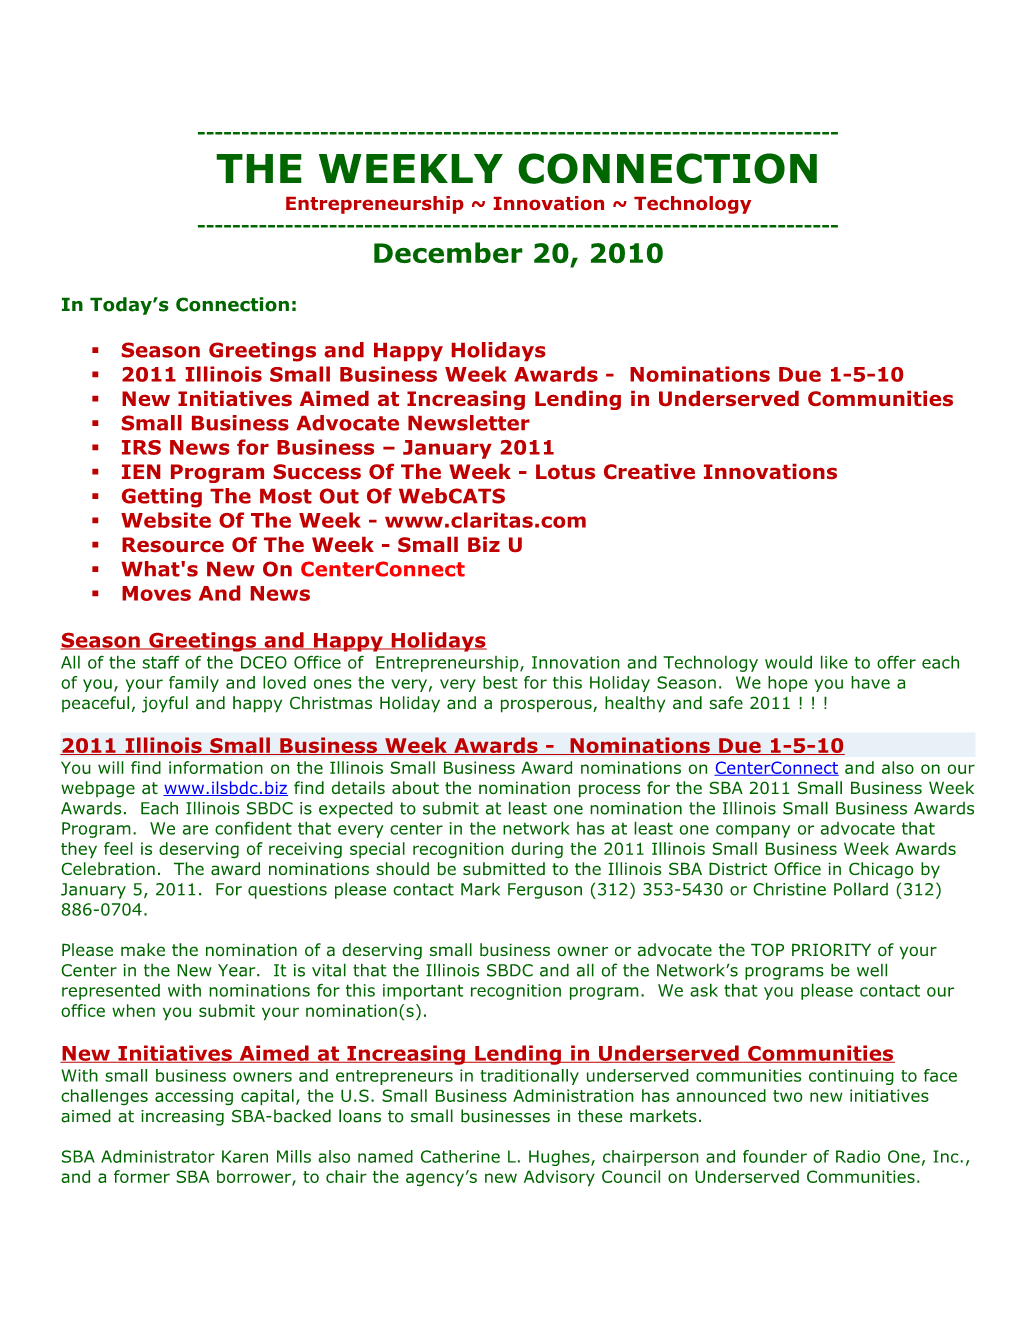 The Weekly Connection s3